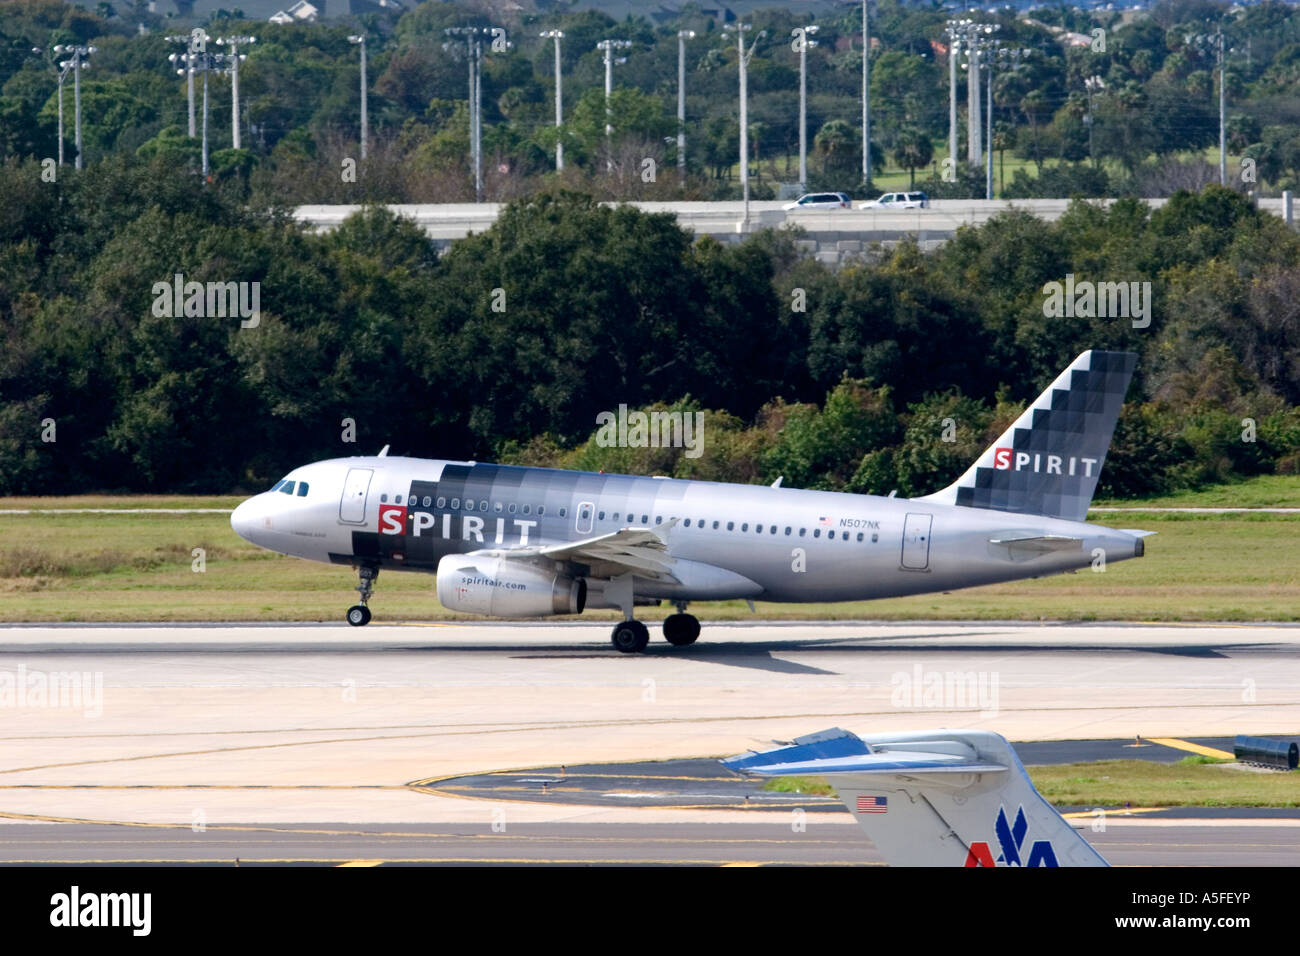 Airbus Airplane ready for take off at the Tampa International Airport Tampa Florida Stock Photo